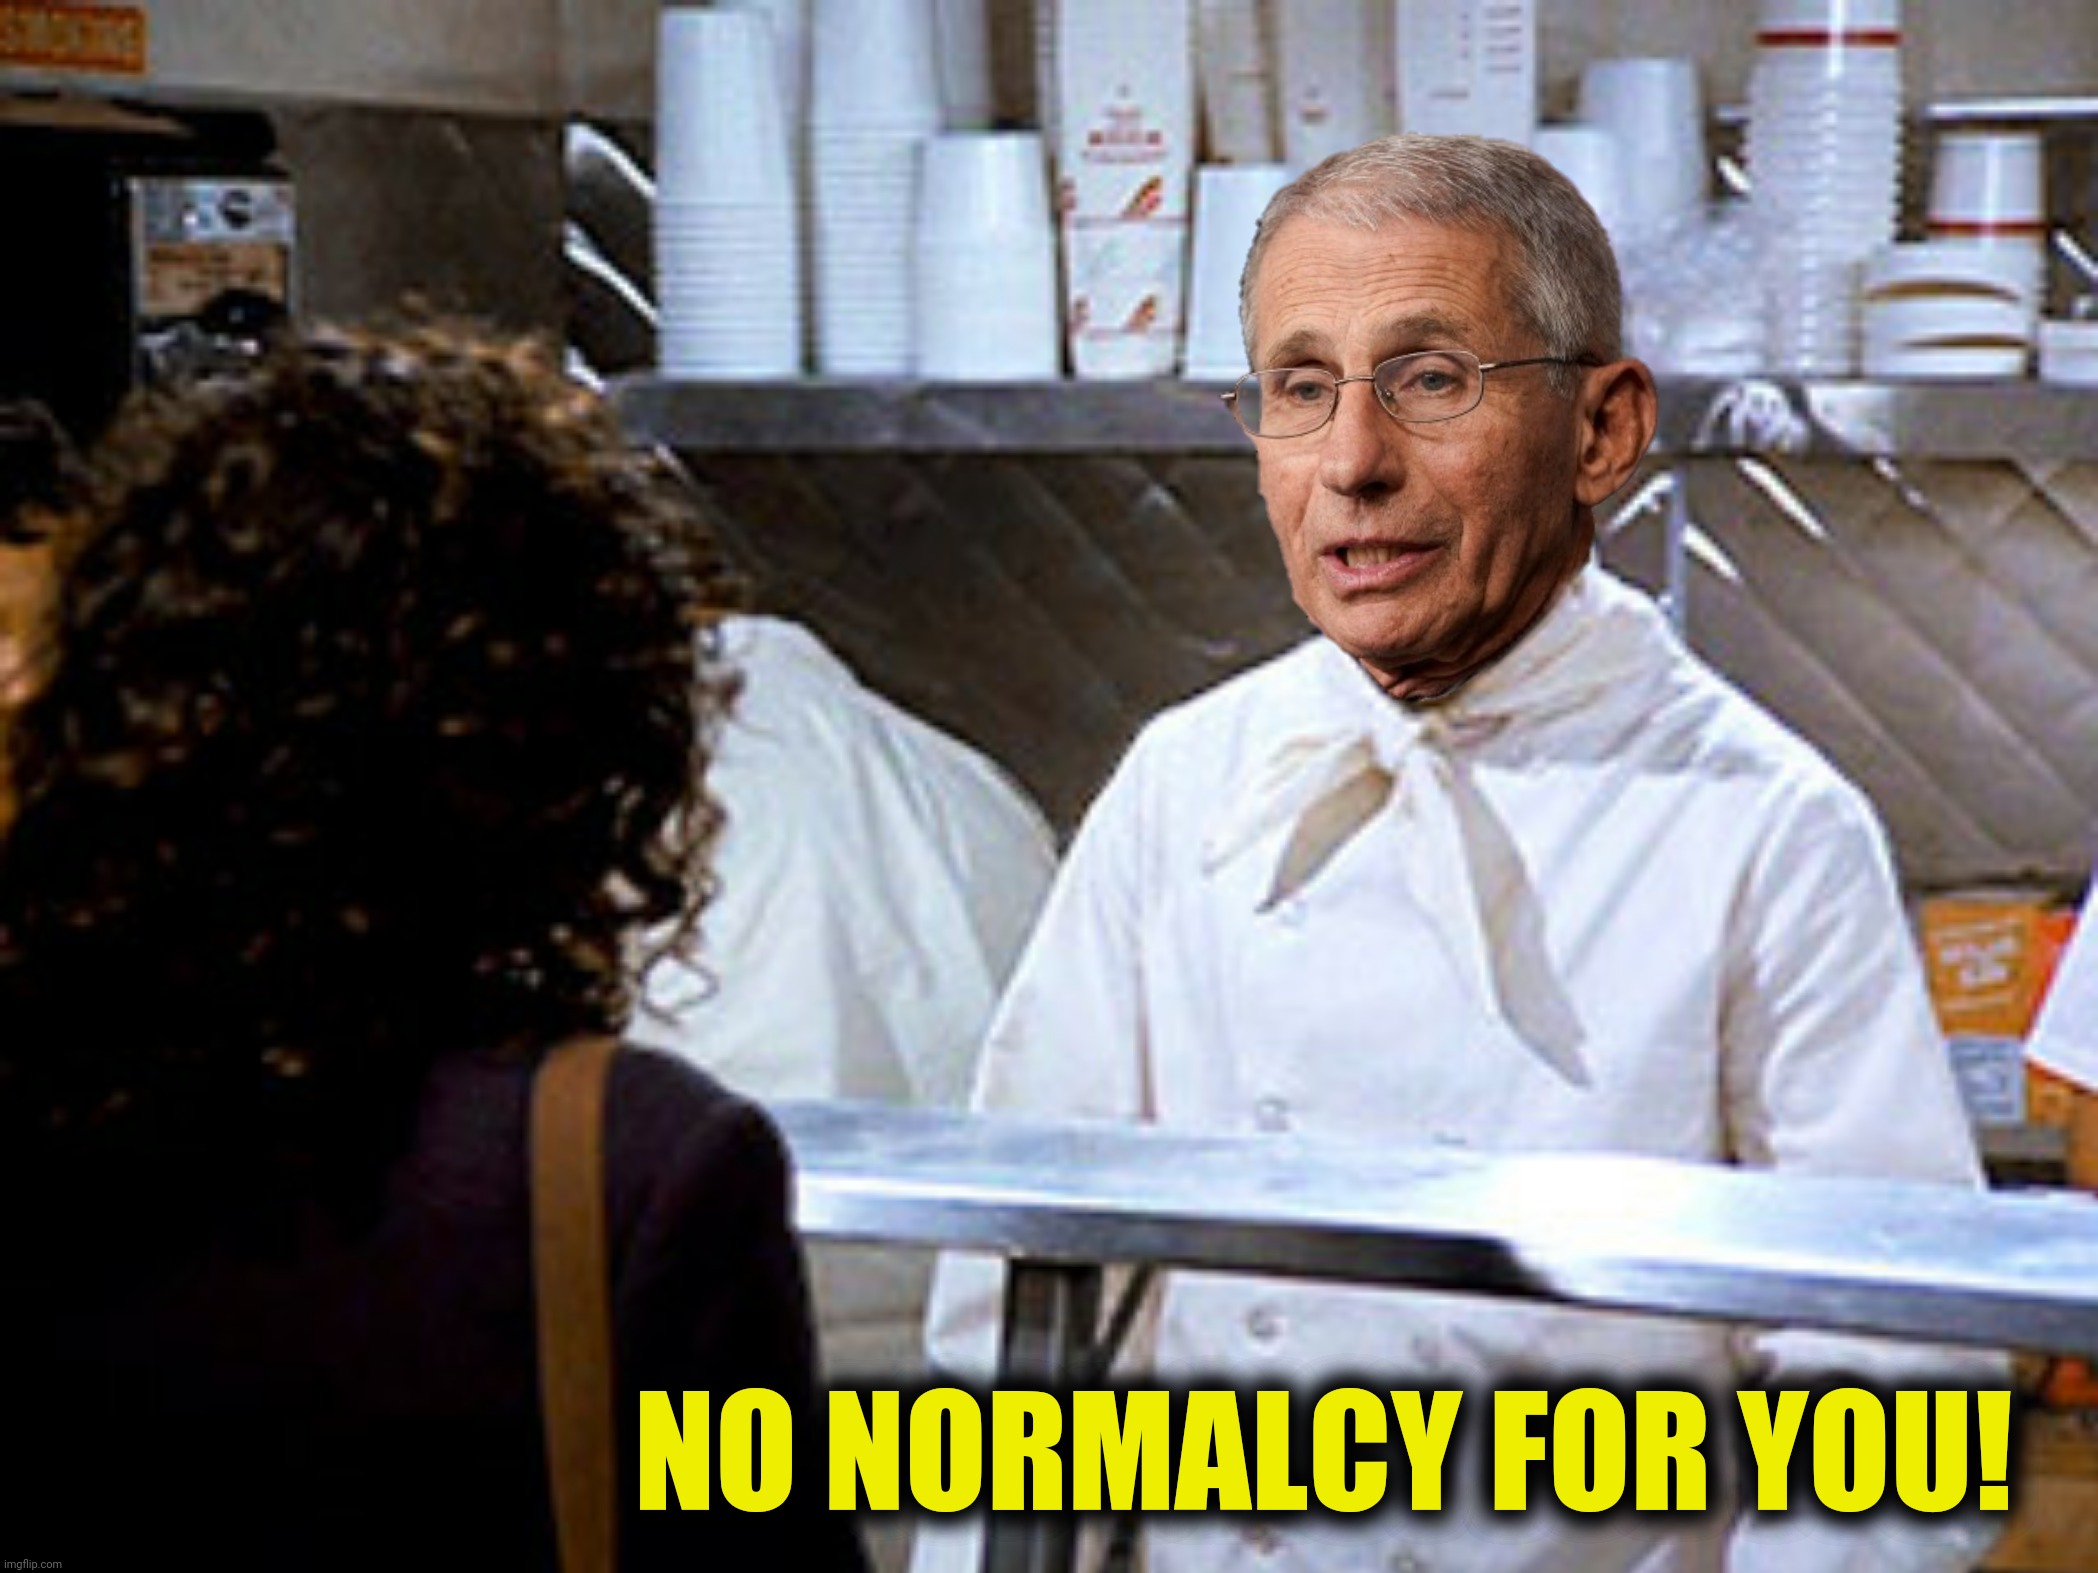 NO NORMALCY FOR YOU! | made w/ Imgflip meme maker